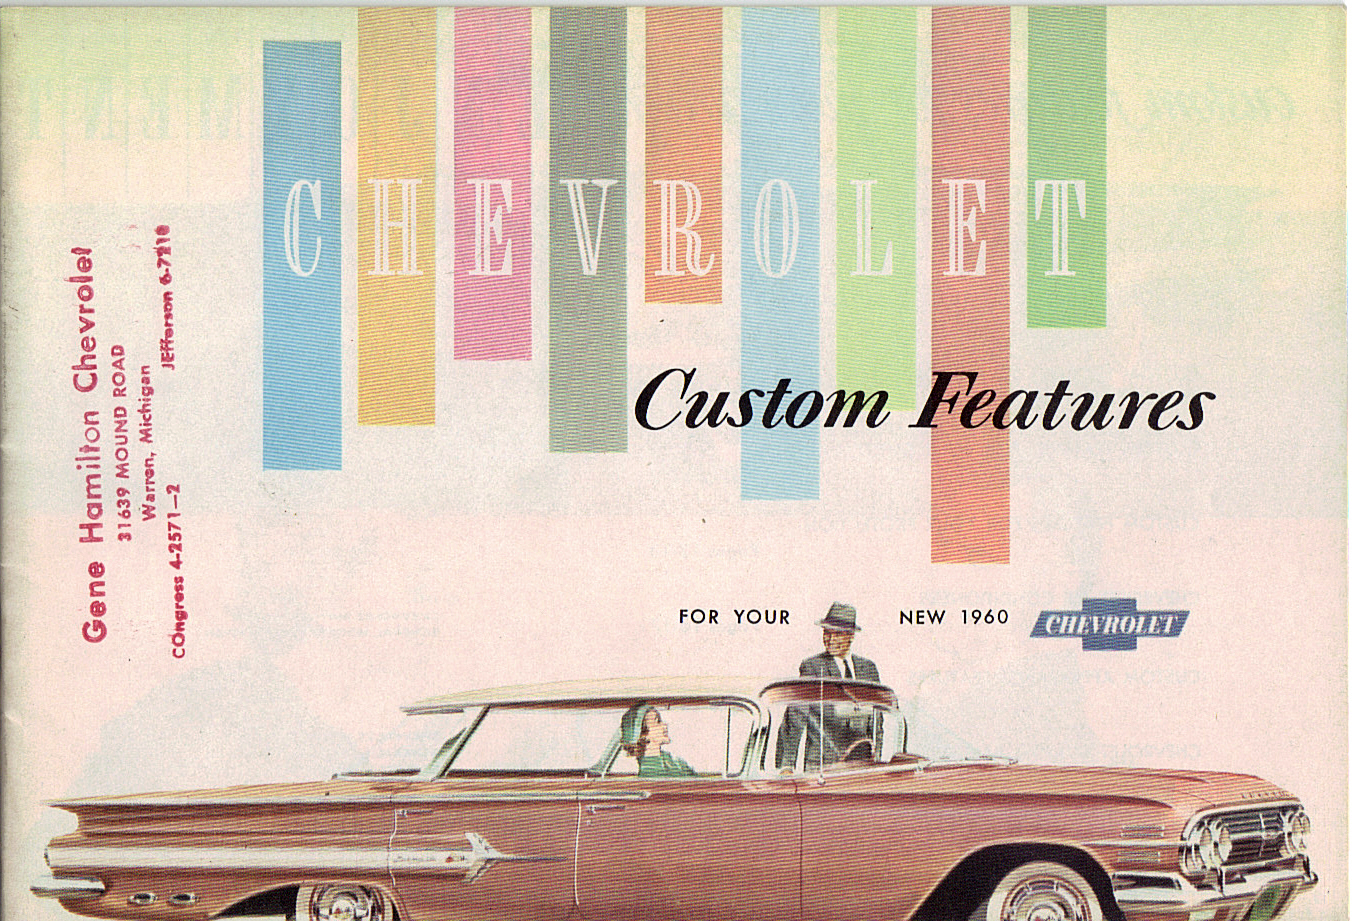 1960 Chevrolet Custom Features Brochure Page 23